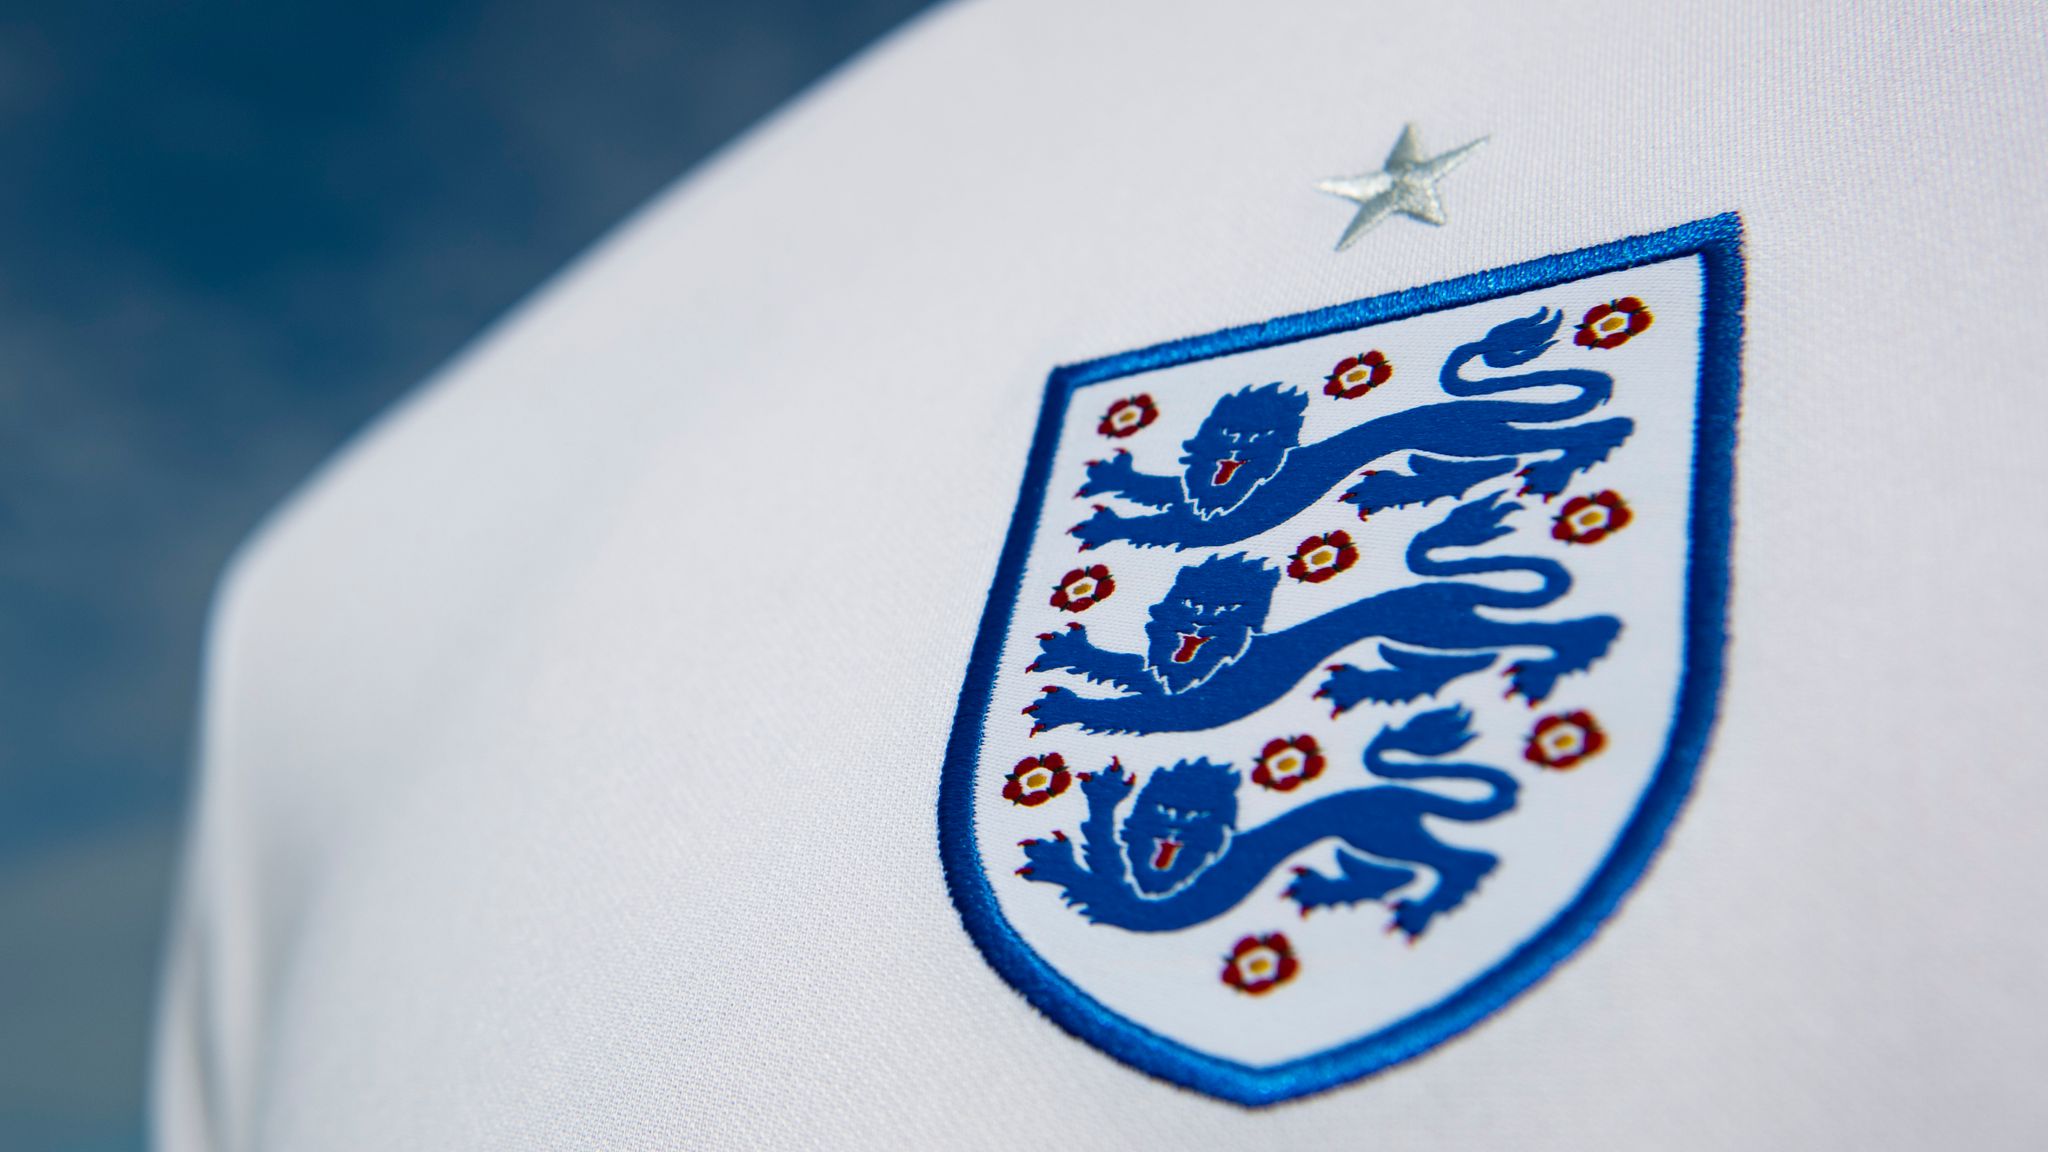 England sack part of Euro 2020 security team following safety concerns ...